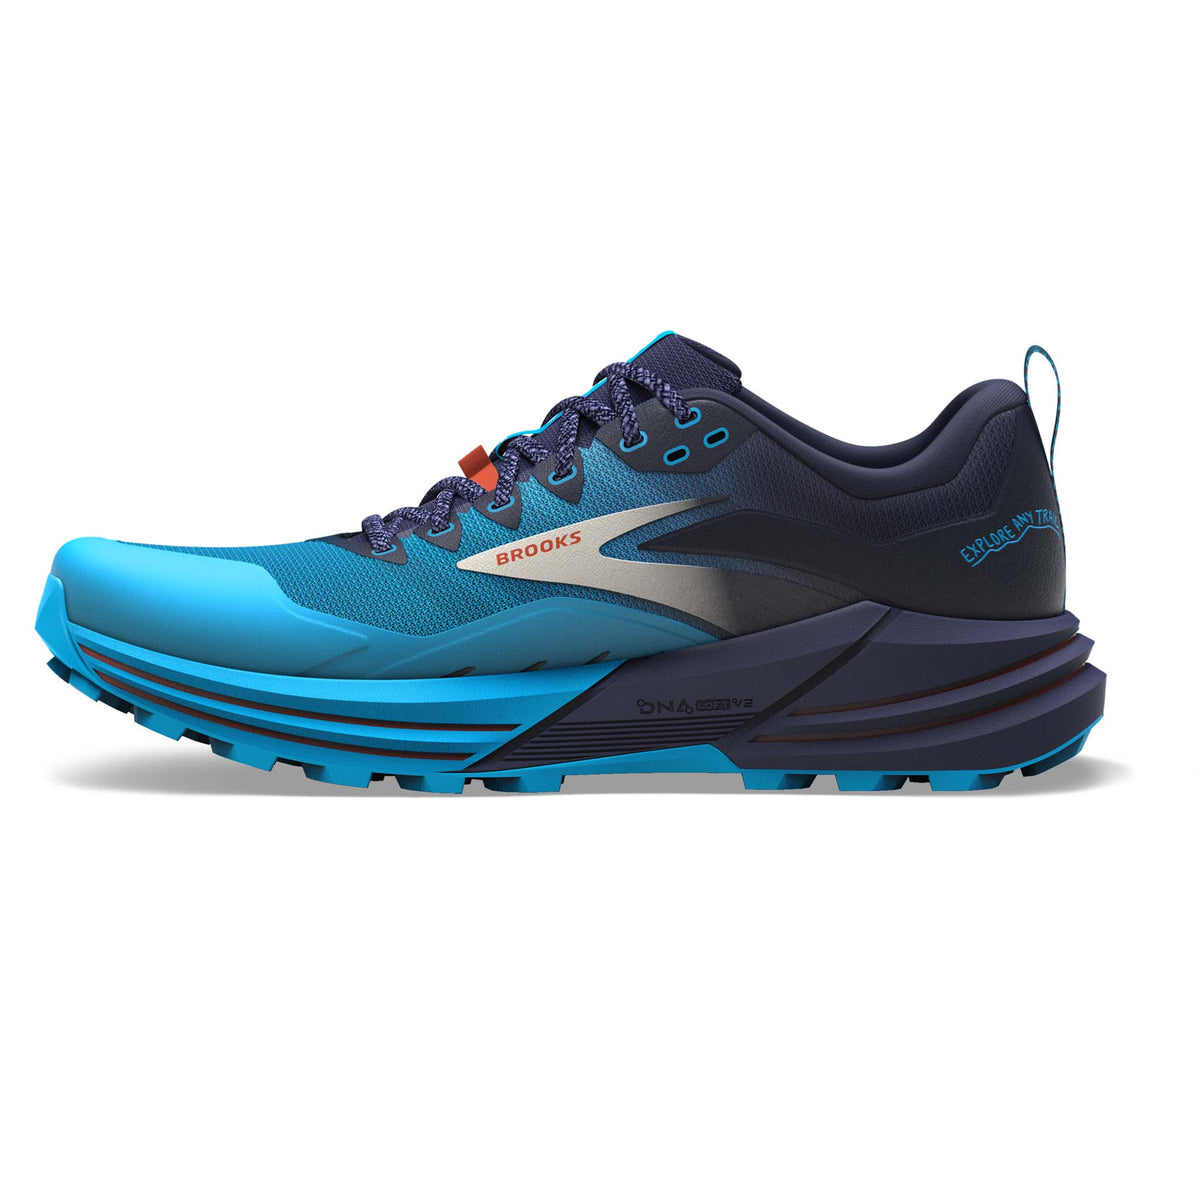 Brooks Cascadia 16 chaussures de course à pied trail homme lateral- peacoat atomic blue rooibos